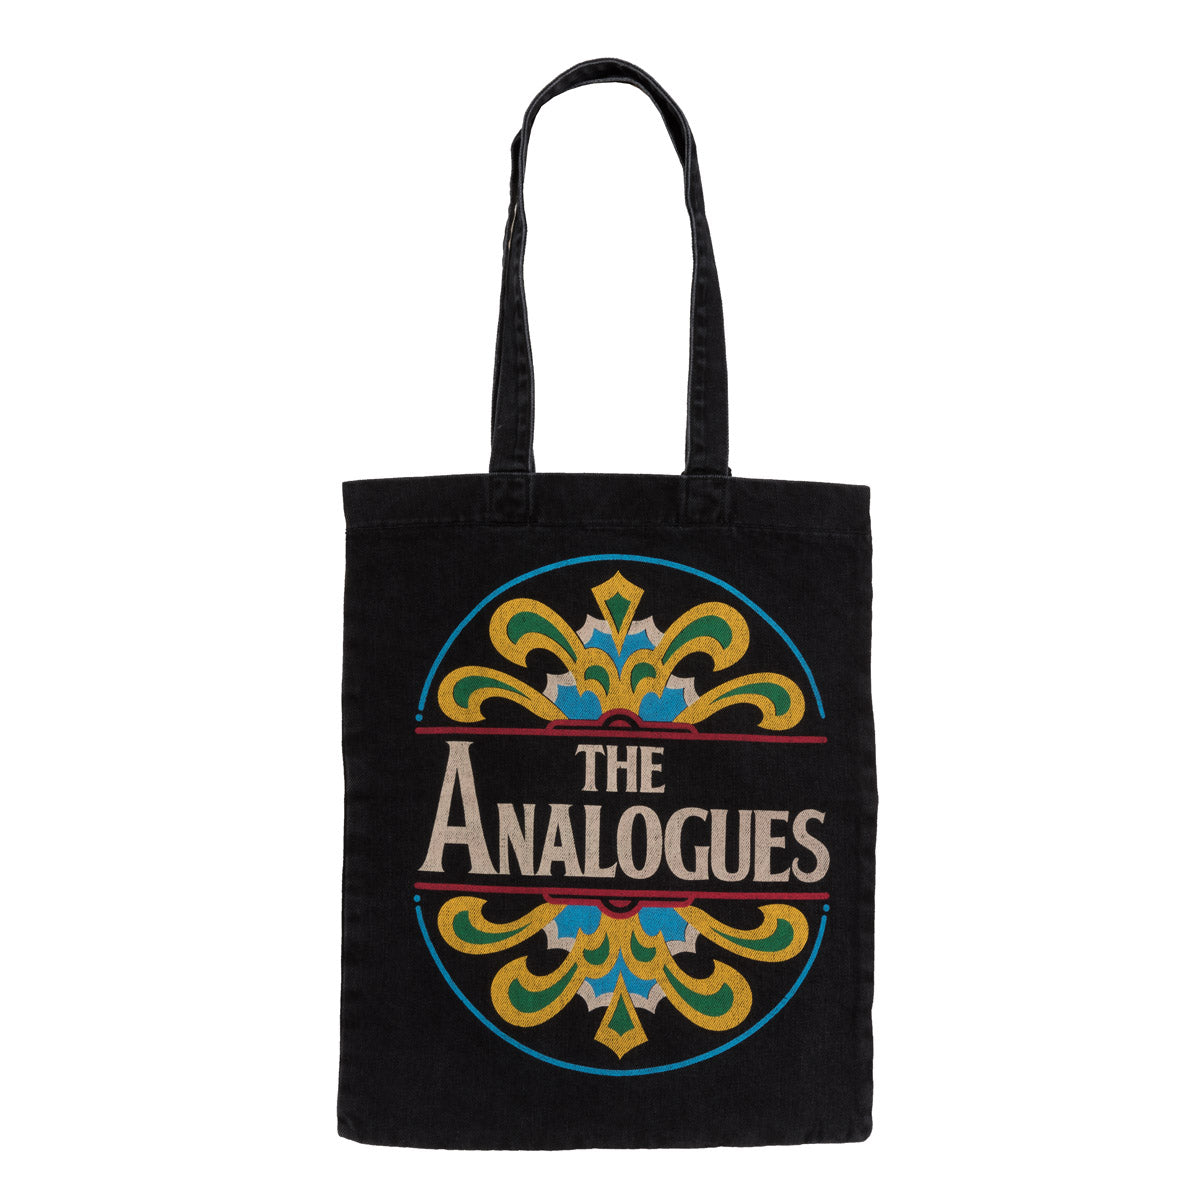 The Analogues | Sgt. Pepper tote bag